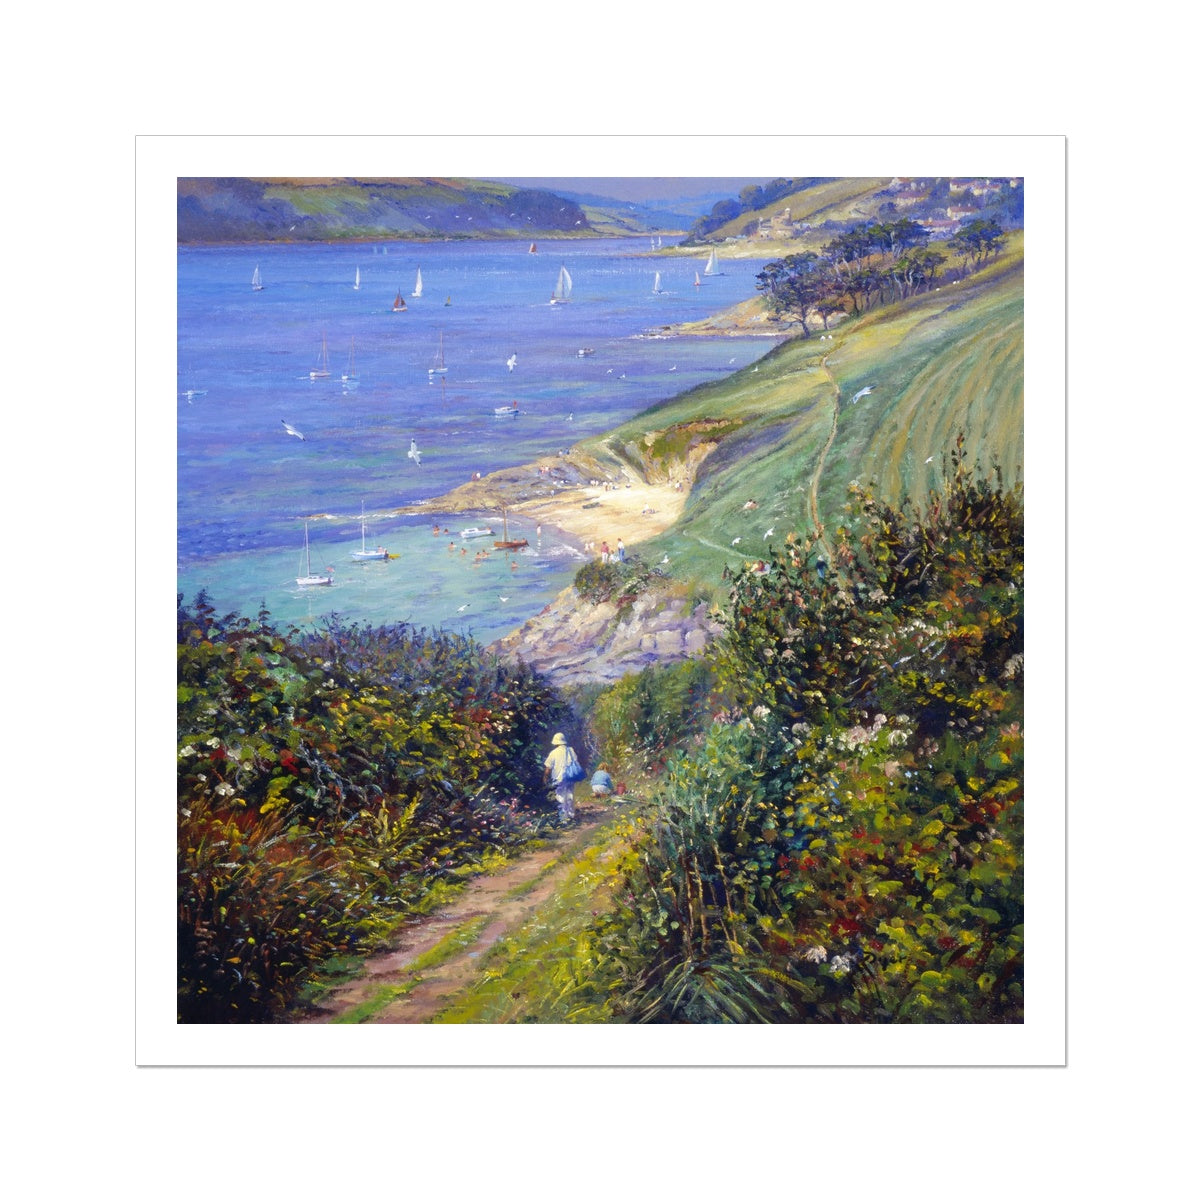 Ted Dyer Fine Art Print. Open Edition Cornish Art Print. &#39;Blackberry Path to the Beach, St Anthony in Roseland&#39;. Cornwall Art Gallery